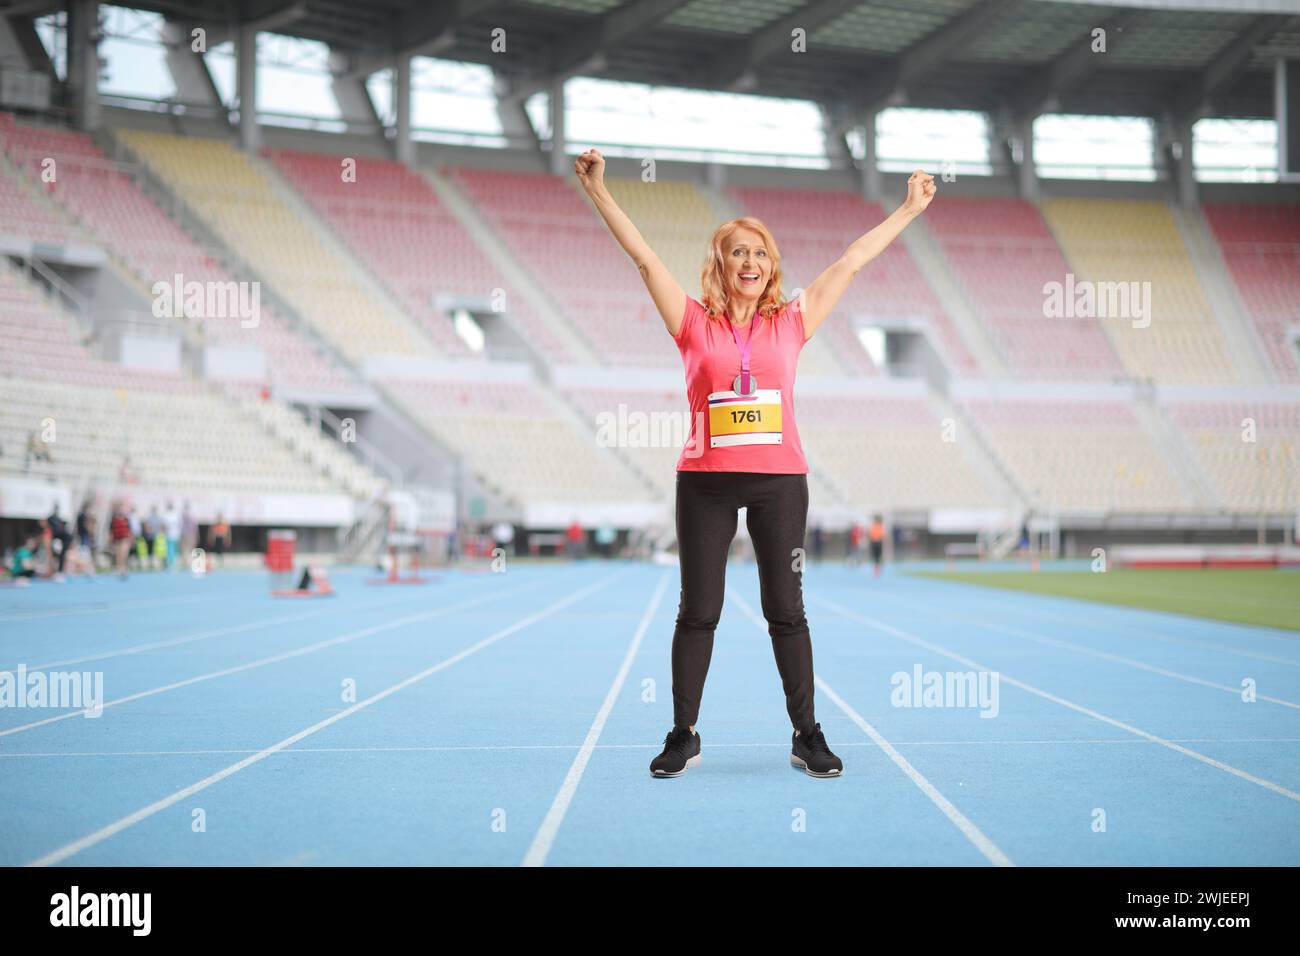 Full length portrait of a mature female runner celebrating victory at a sports stadium Stock Photo